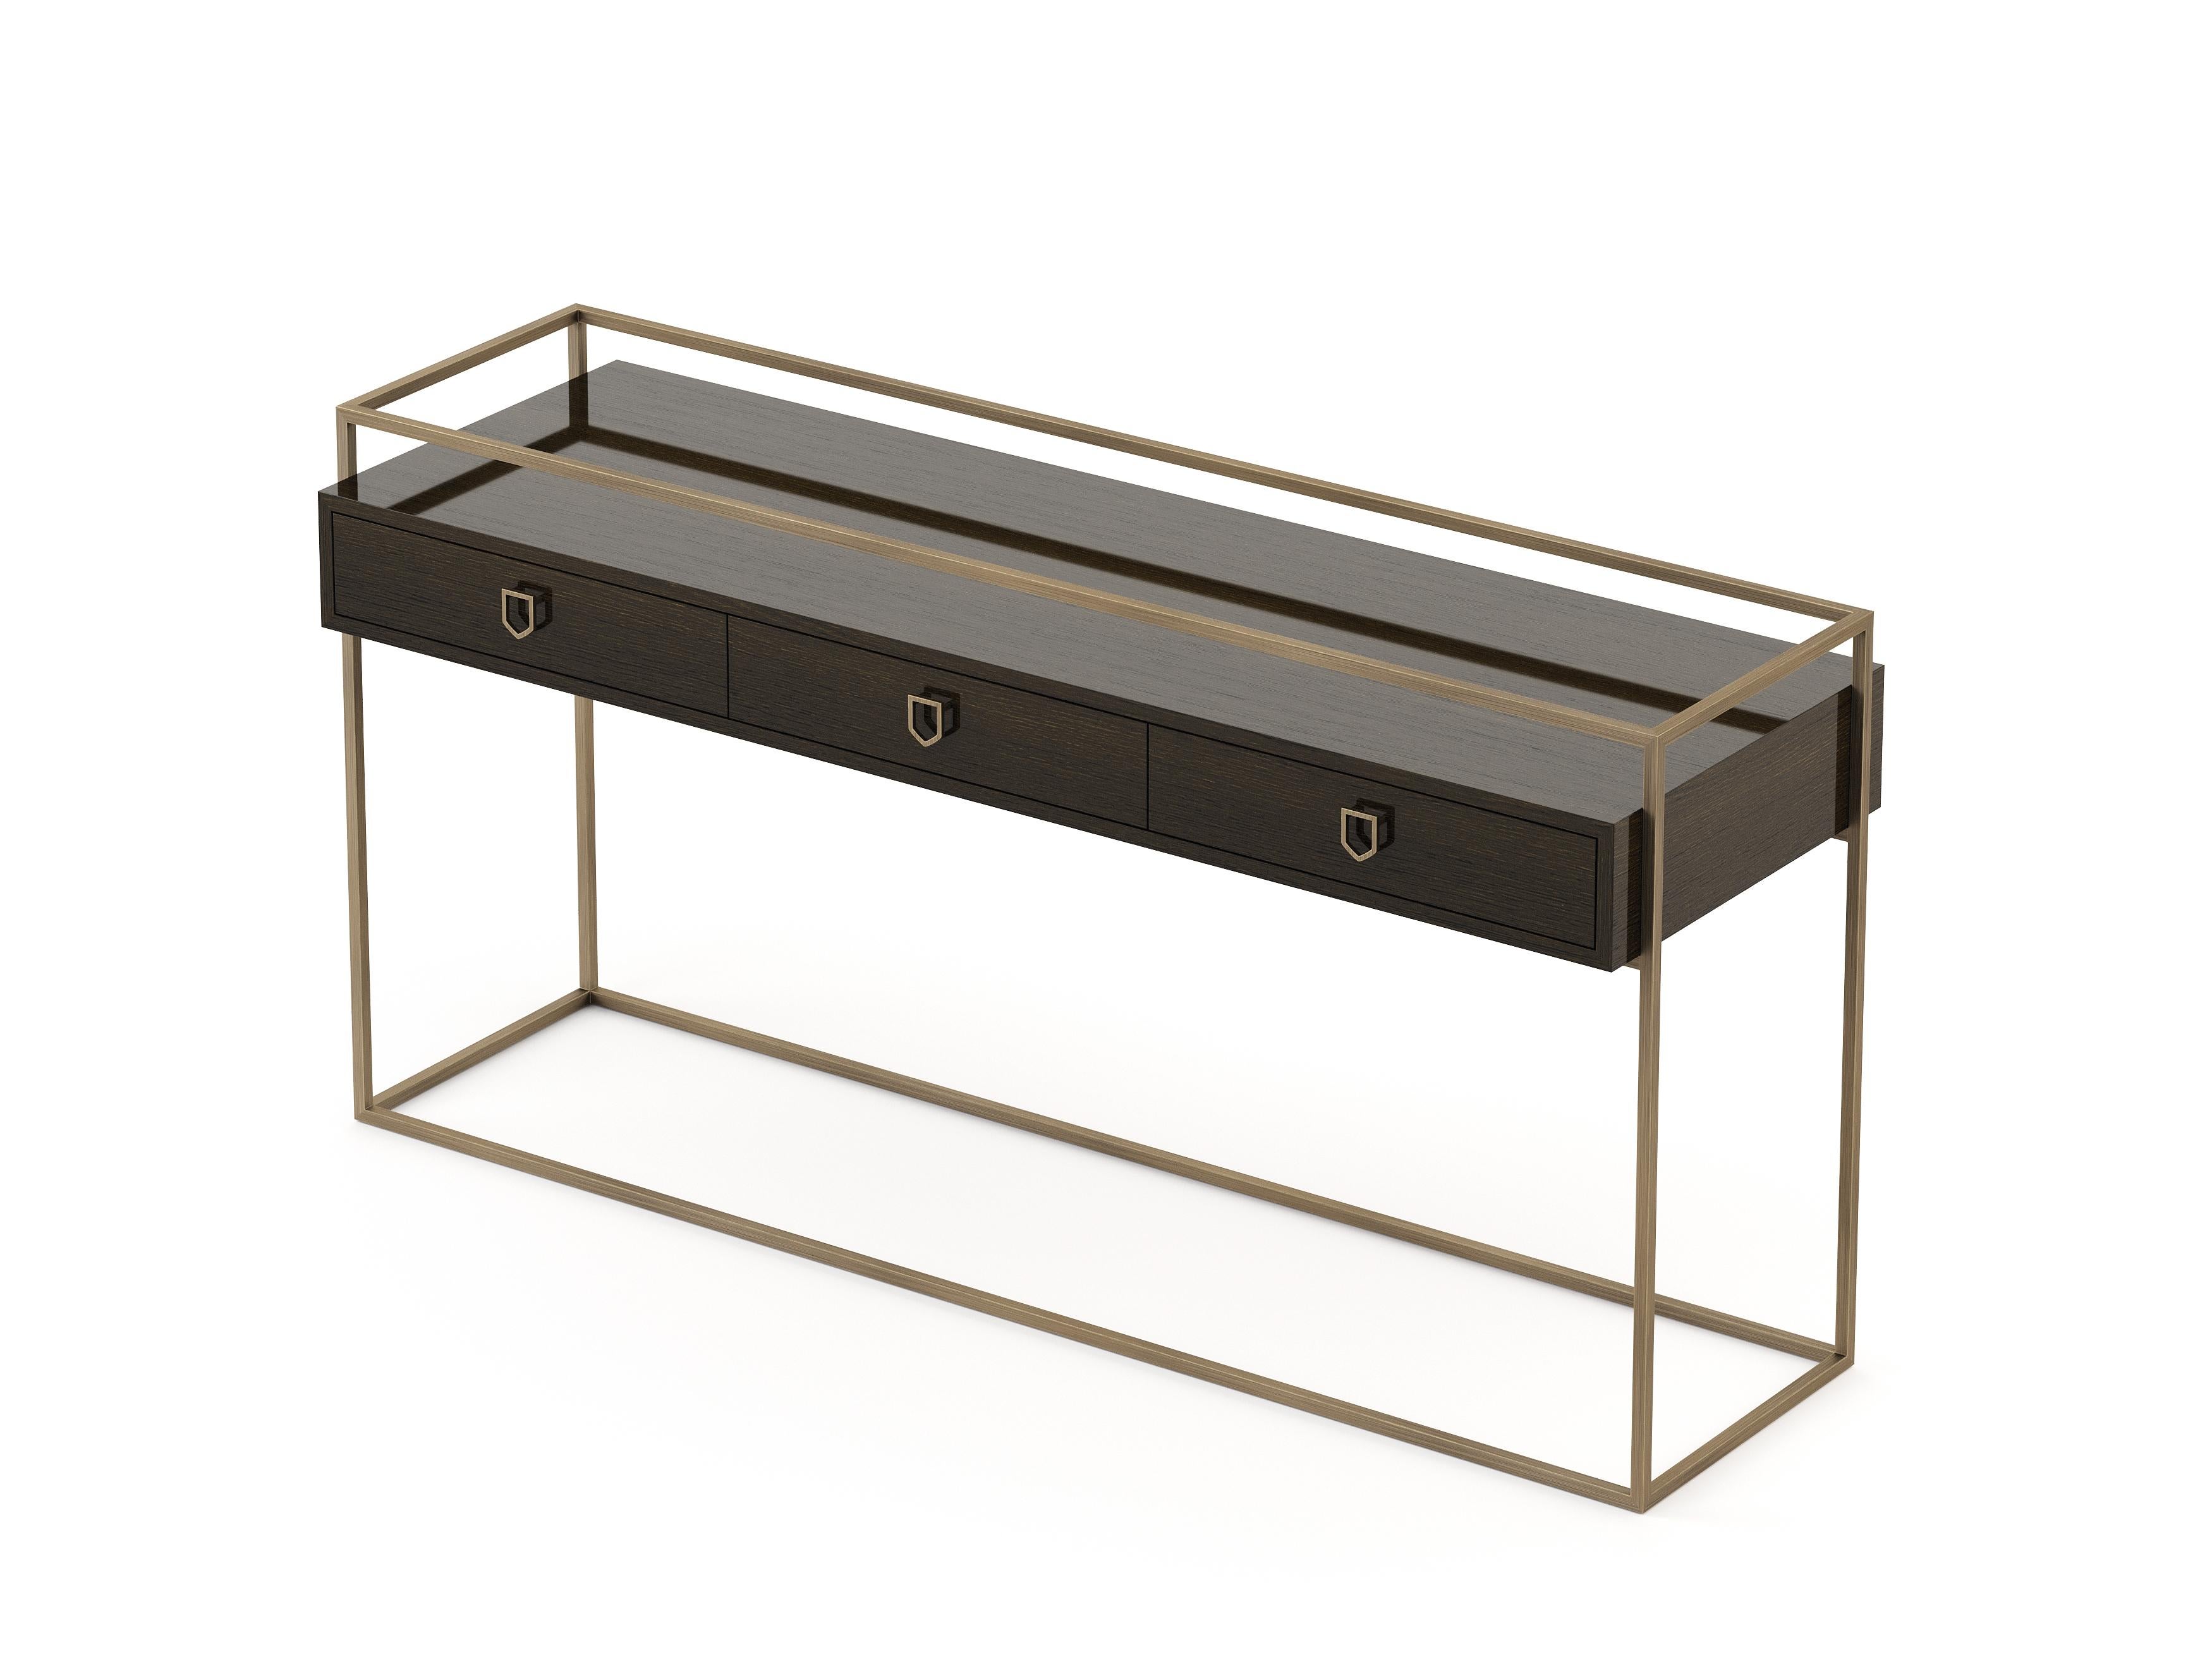 Portuguese Mid-Century Modern Cocktail Console made with Oak and brass, Handmade For Sale